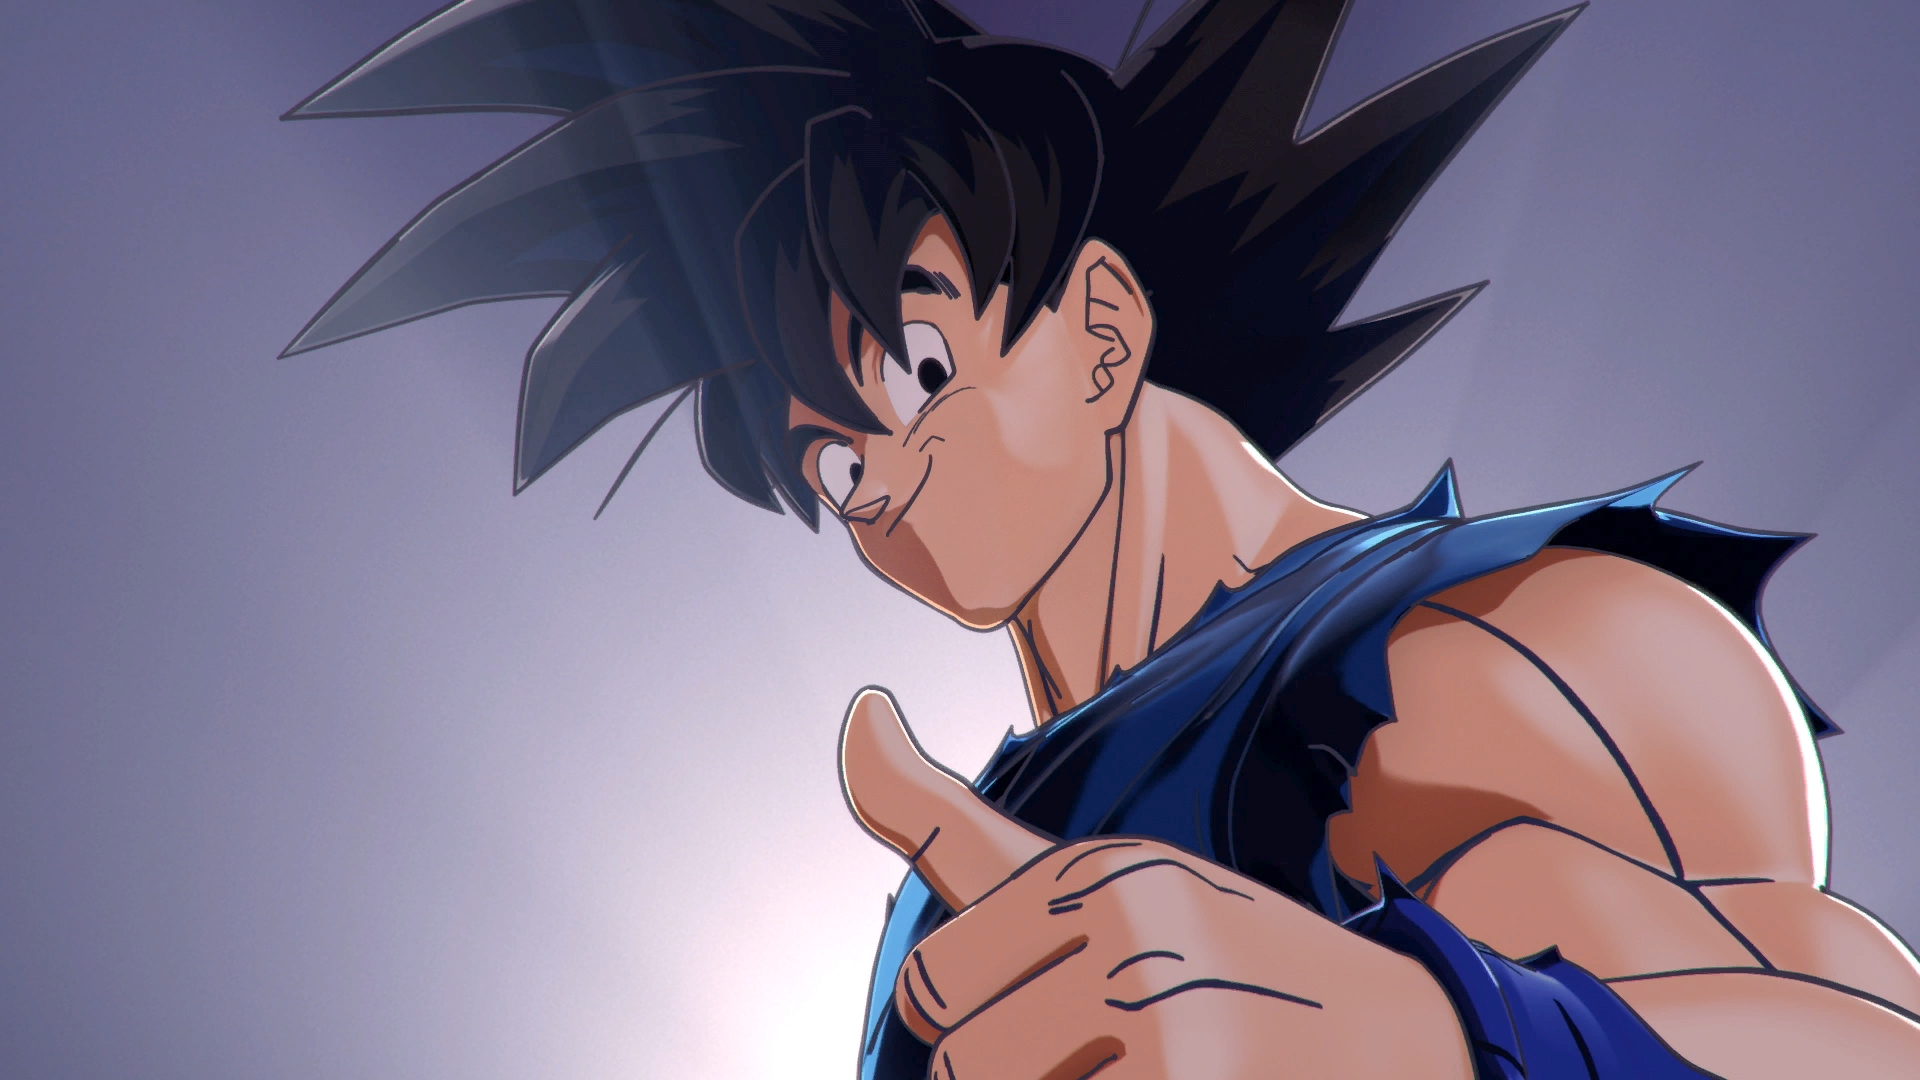 Anime 1920x1080 Dragon Ball Xenoverse 2 anime men CGI video game art muscles Son Goku looking at viewer thumbs up smiling simple background minimalism Dragon Ball Z